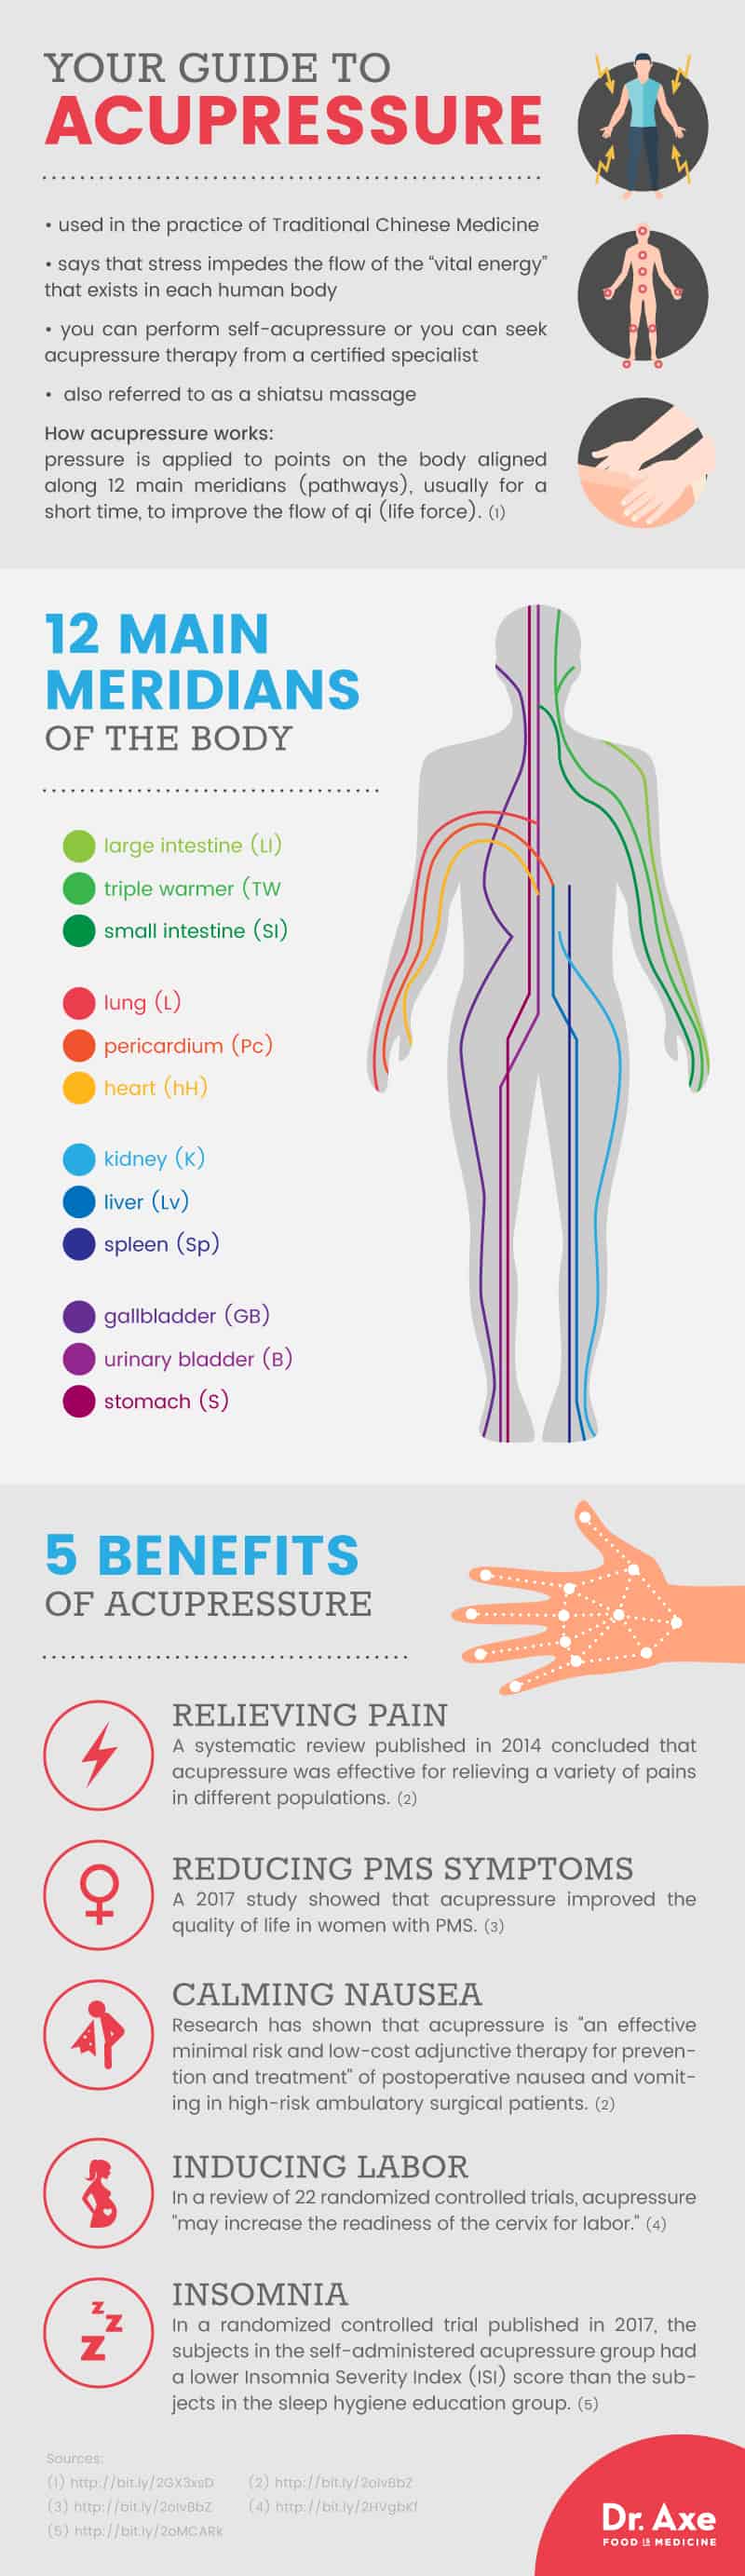 Acupressure guide - Dr. Axe